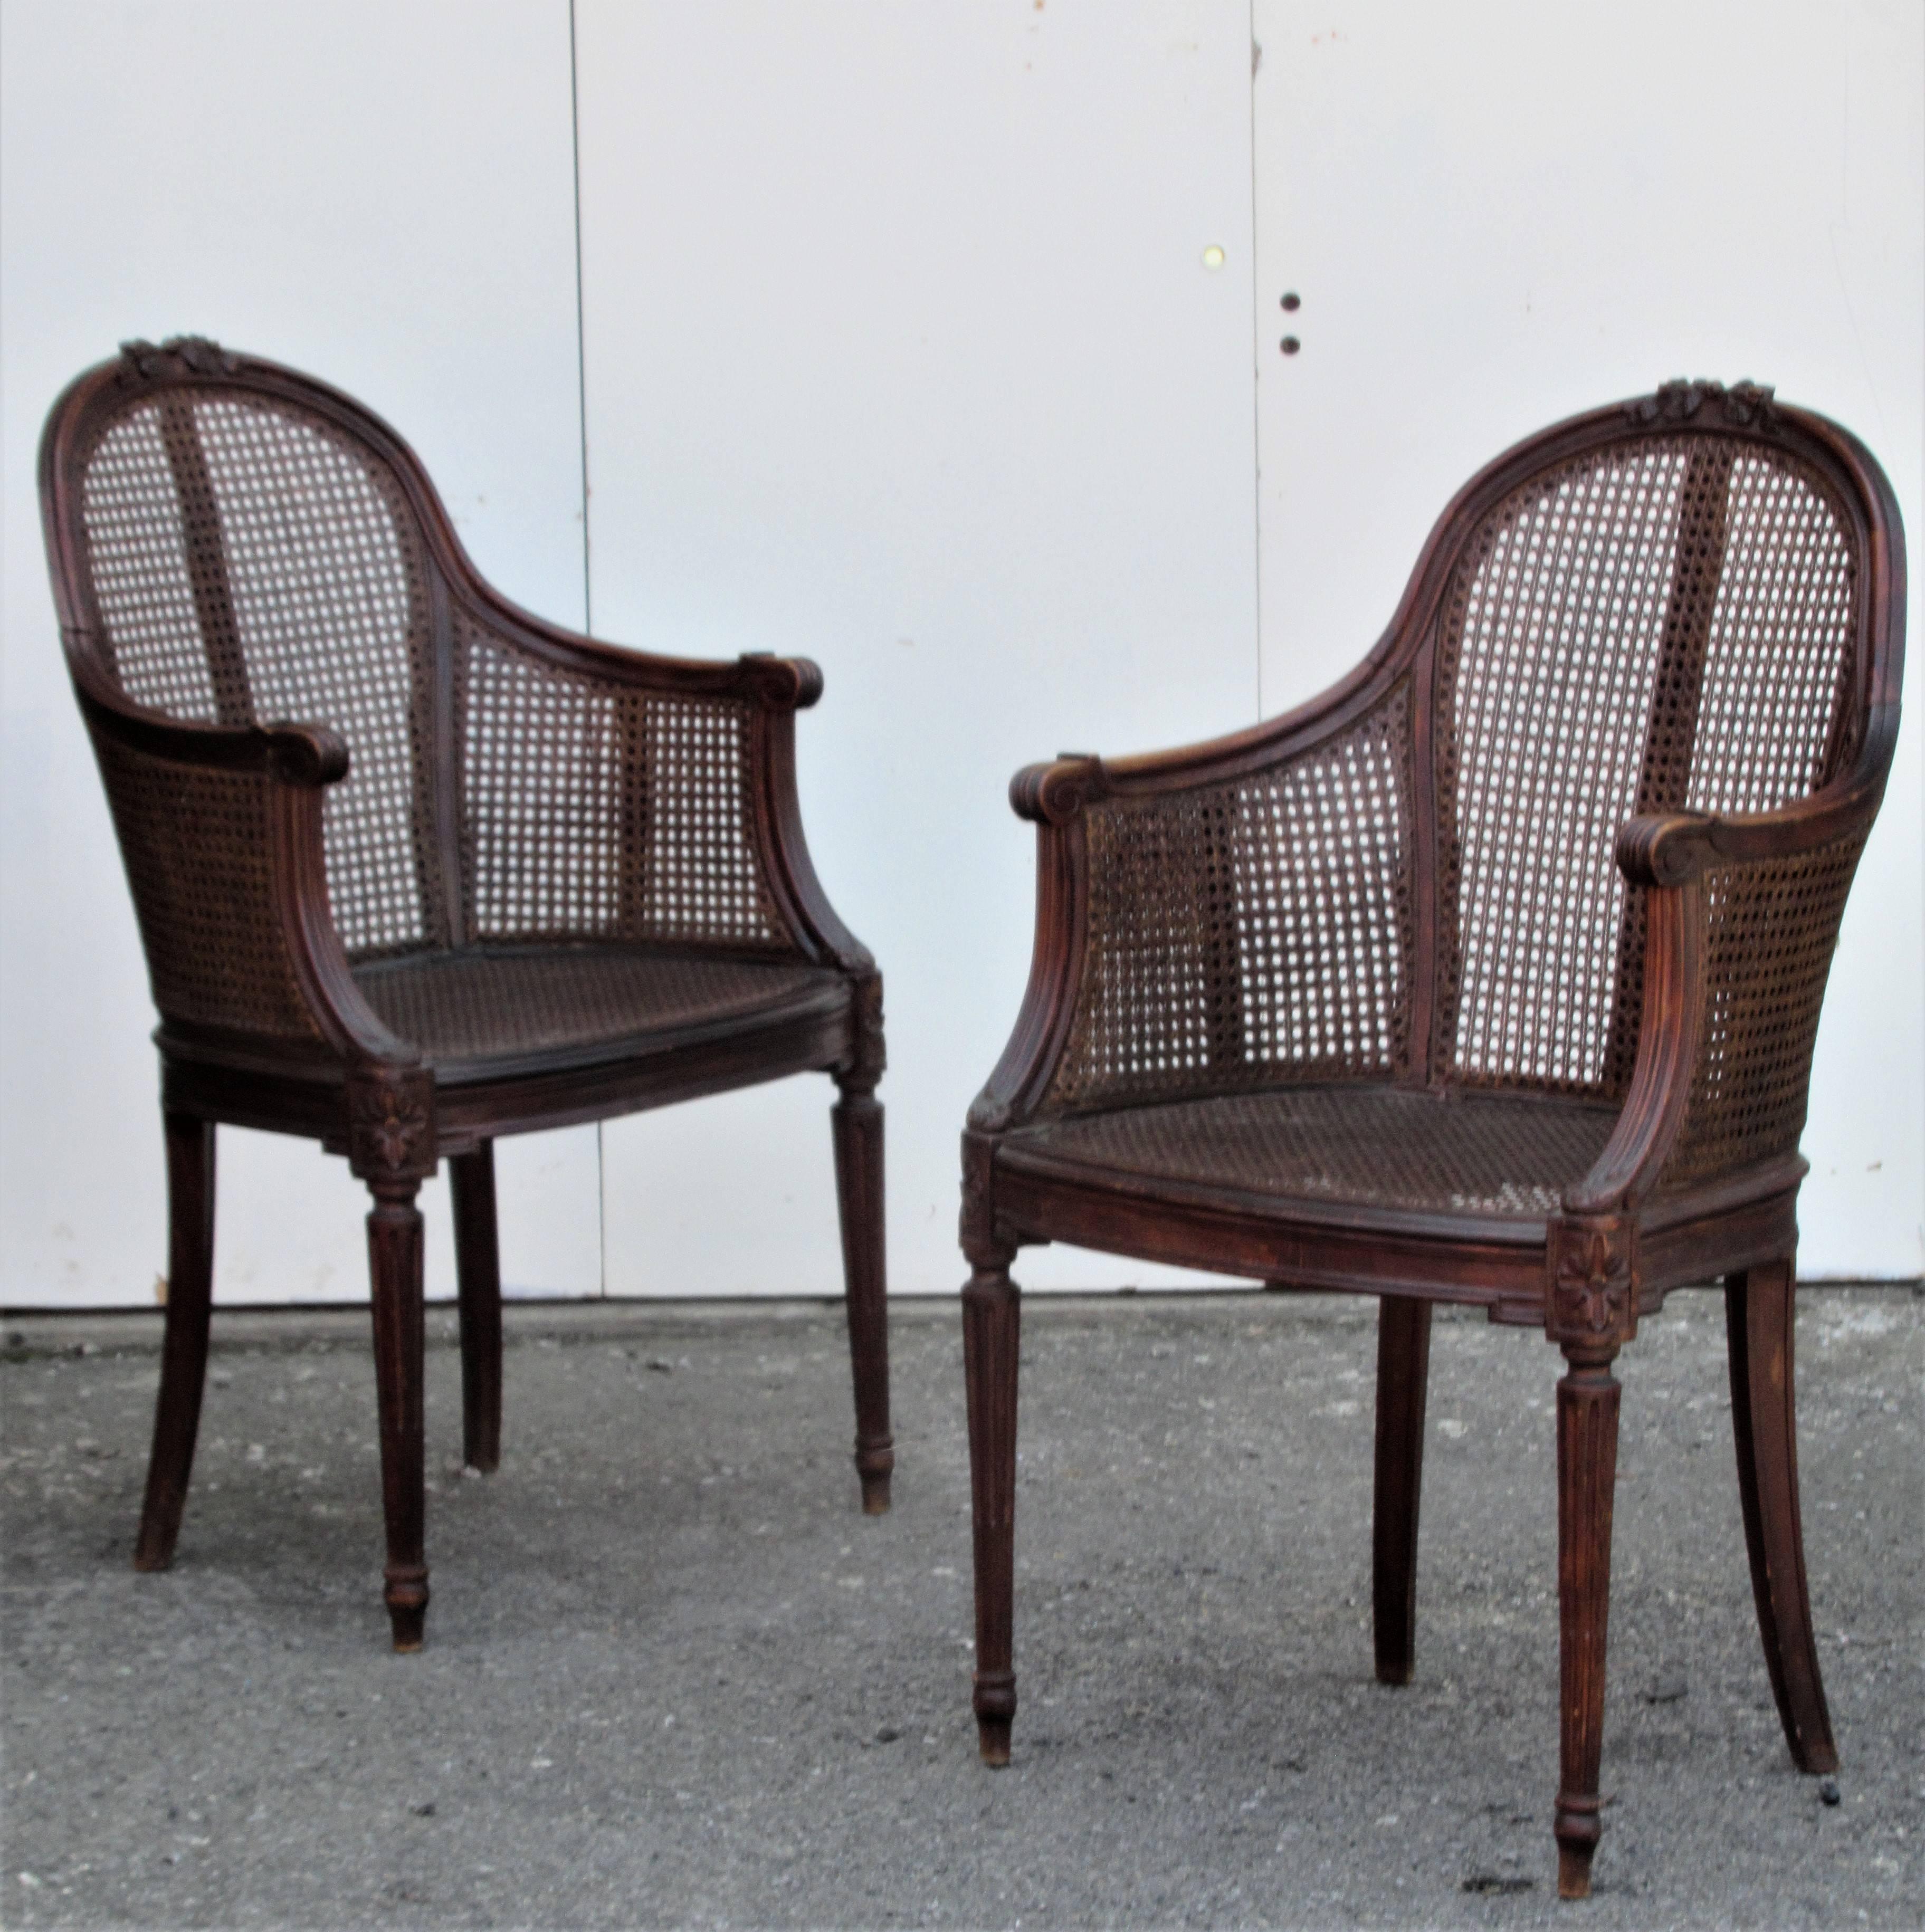 Pair of finely carved Louis XVI style bergere chairs with original caning and perfectly aged rich color patina to wood and cane. We think they are beechwood. Circa 1920-1940.